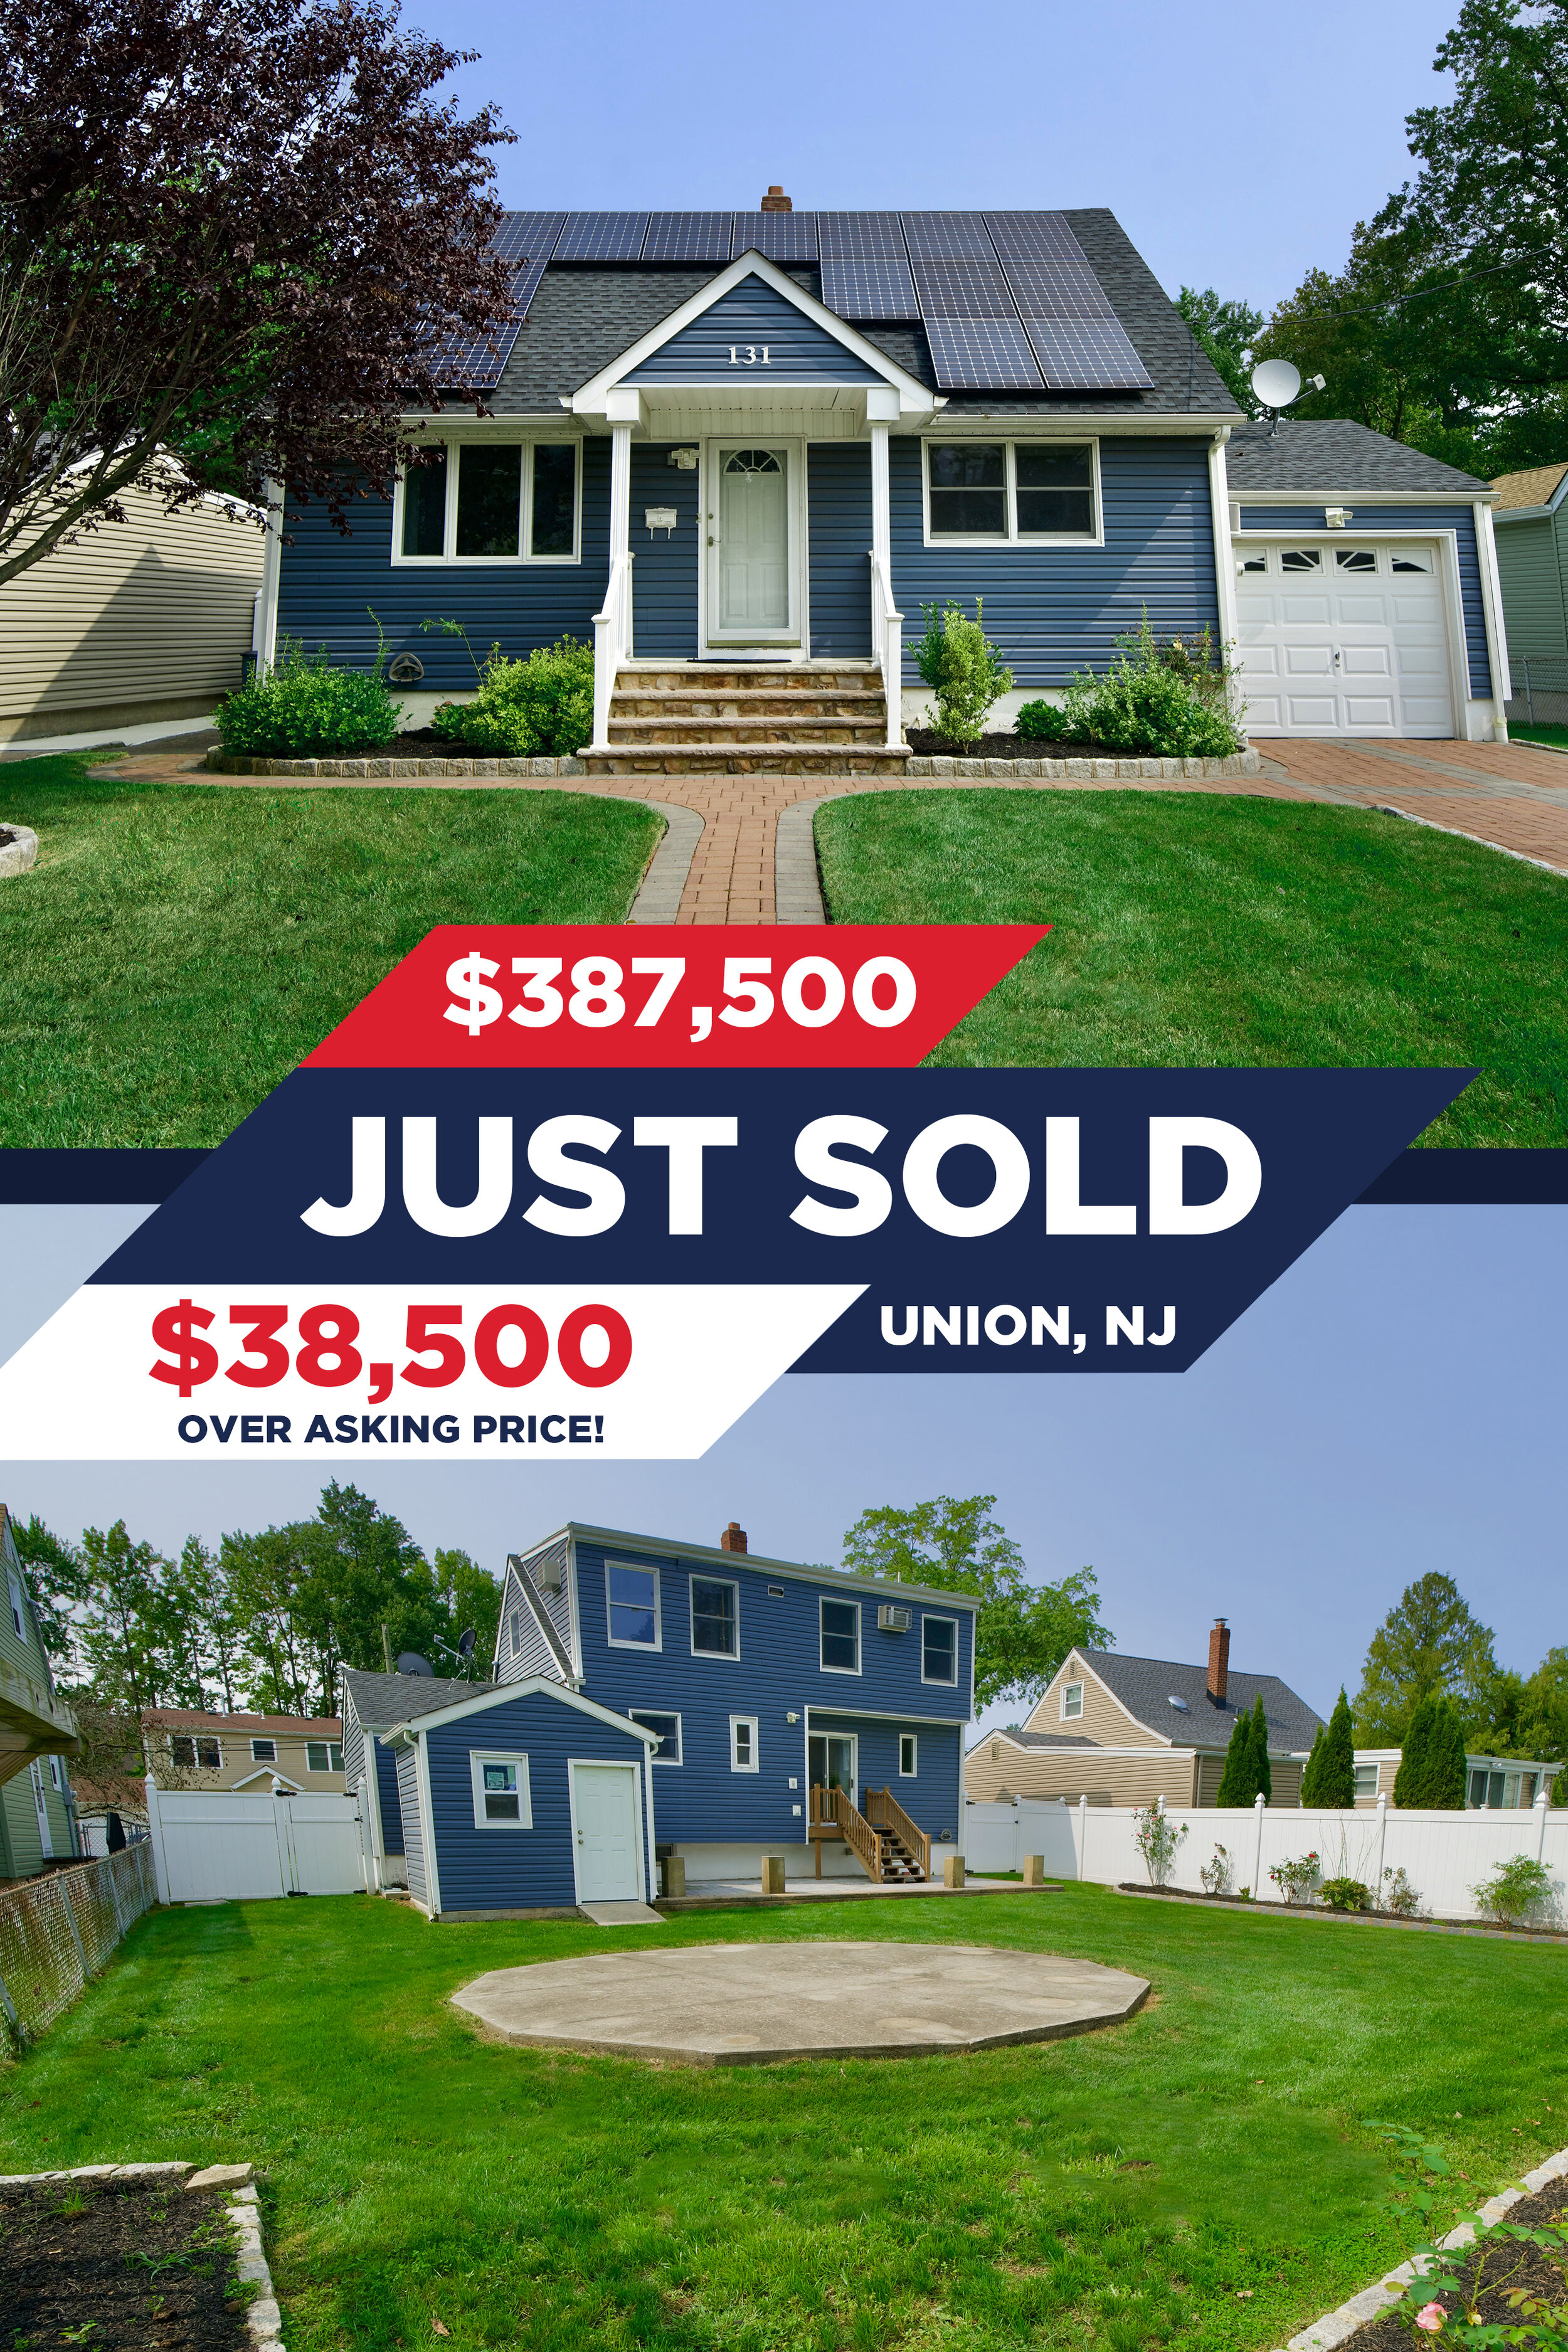 Cat Gomes Sells Homes in Union NJ - 131 Hickory $38,500 over asking price